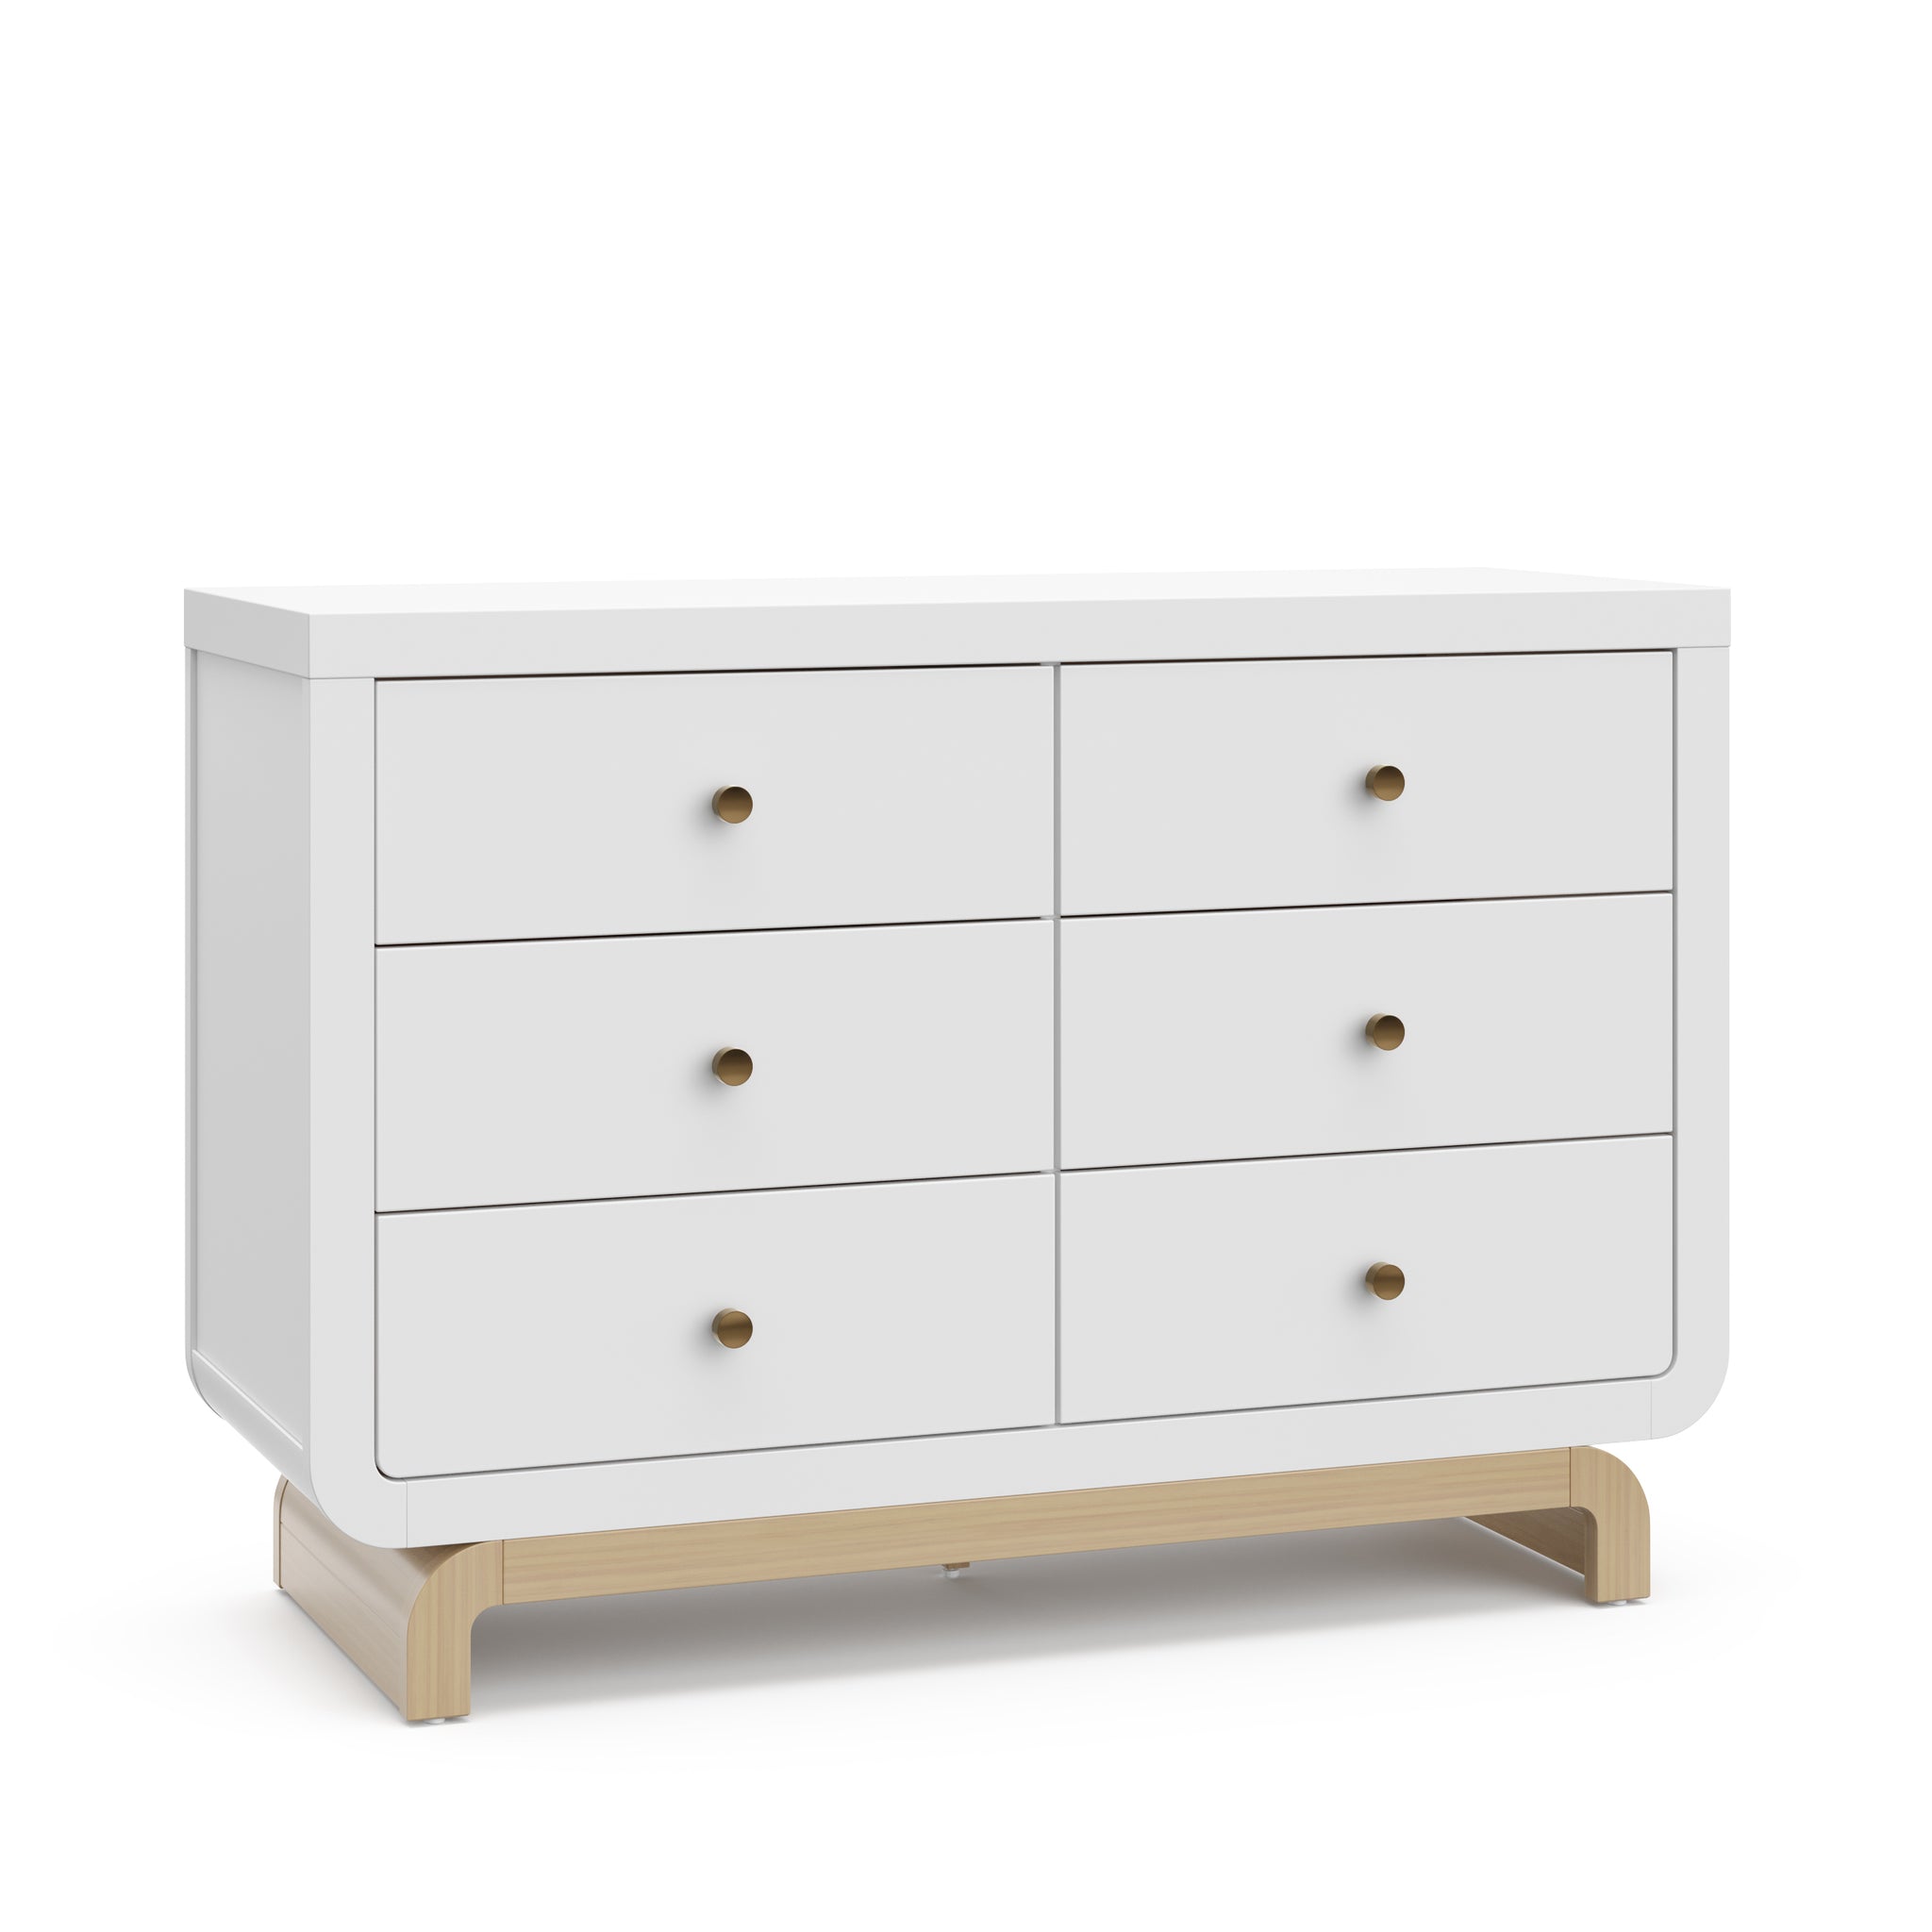 Angled view of white 6 drawer dresser with driftwood base 